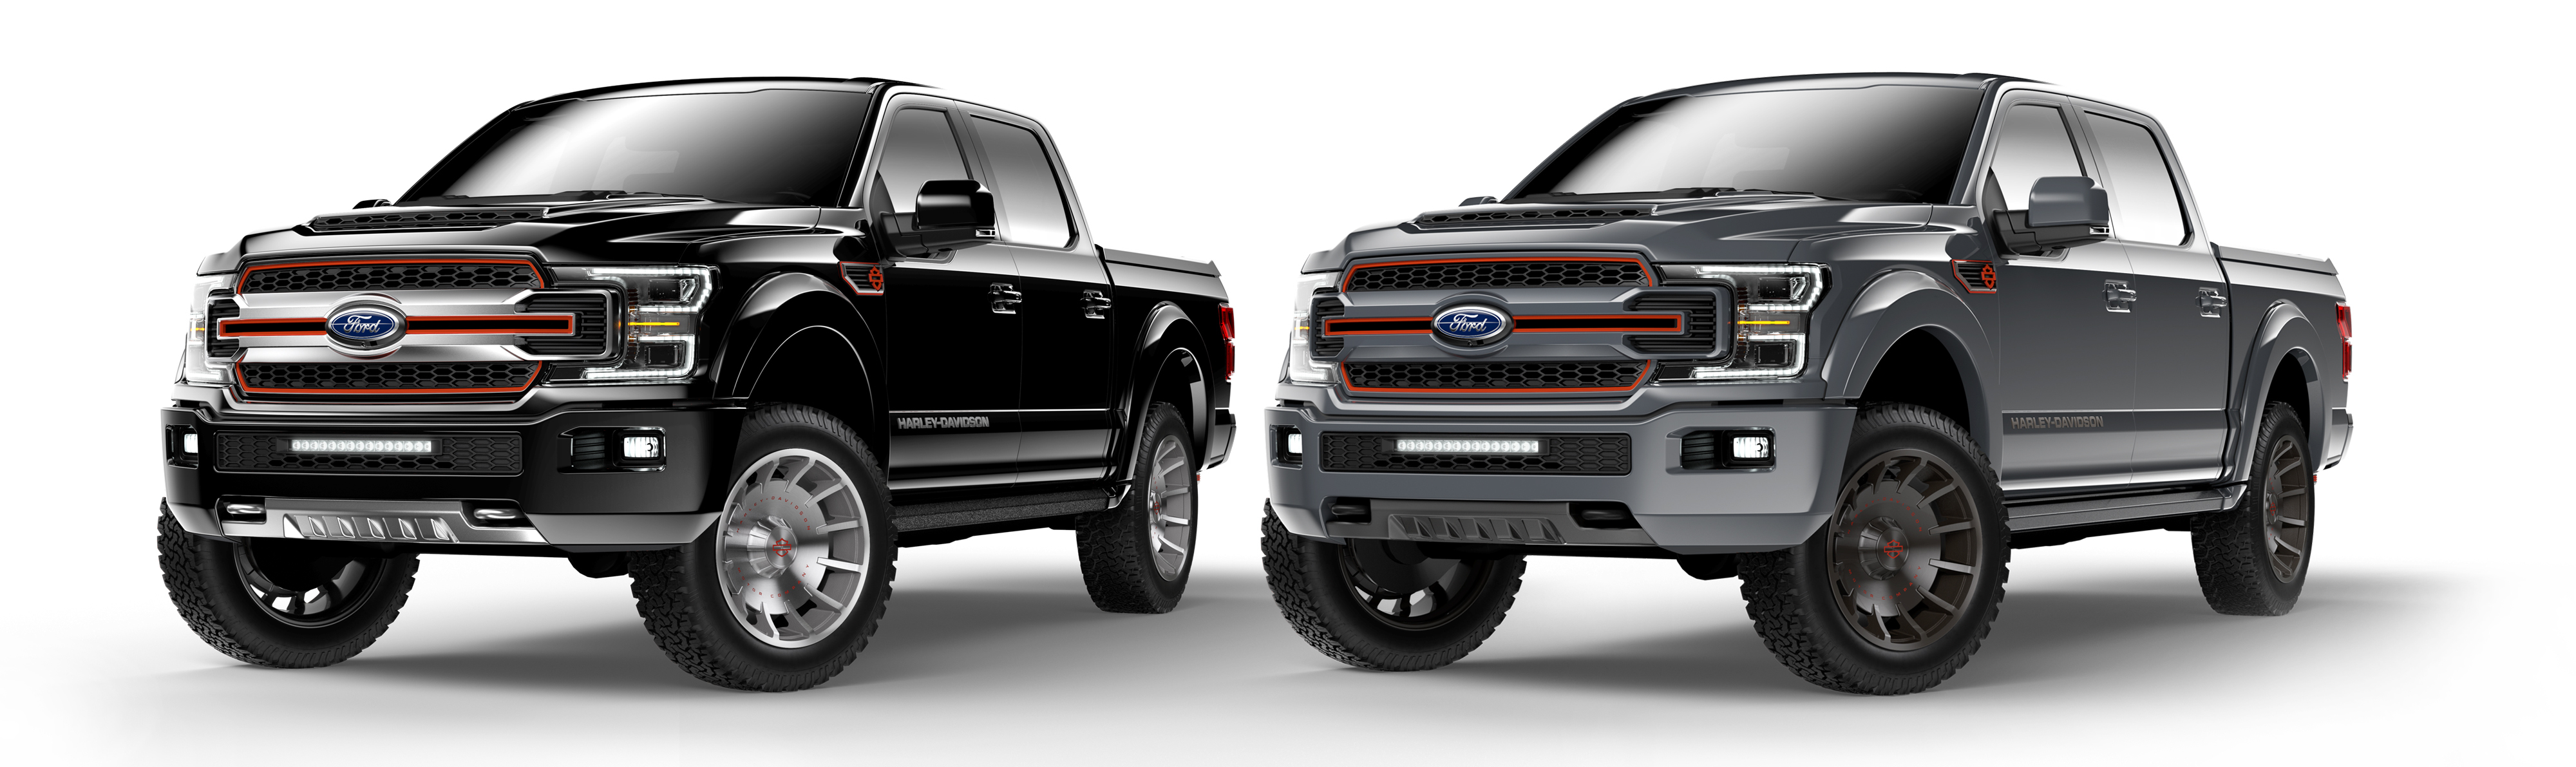 2019 Ford F 150 Harley Davidson Truck On Display This Week